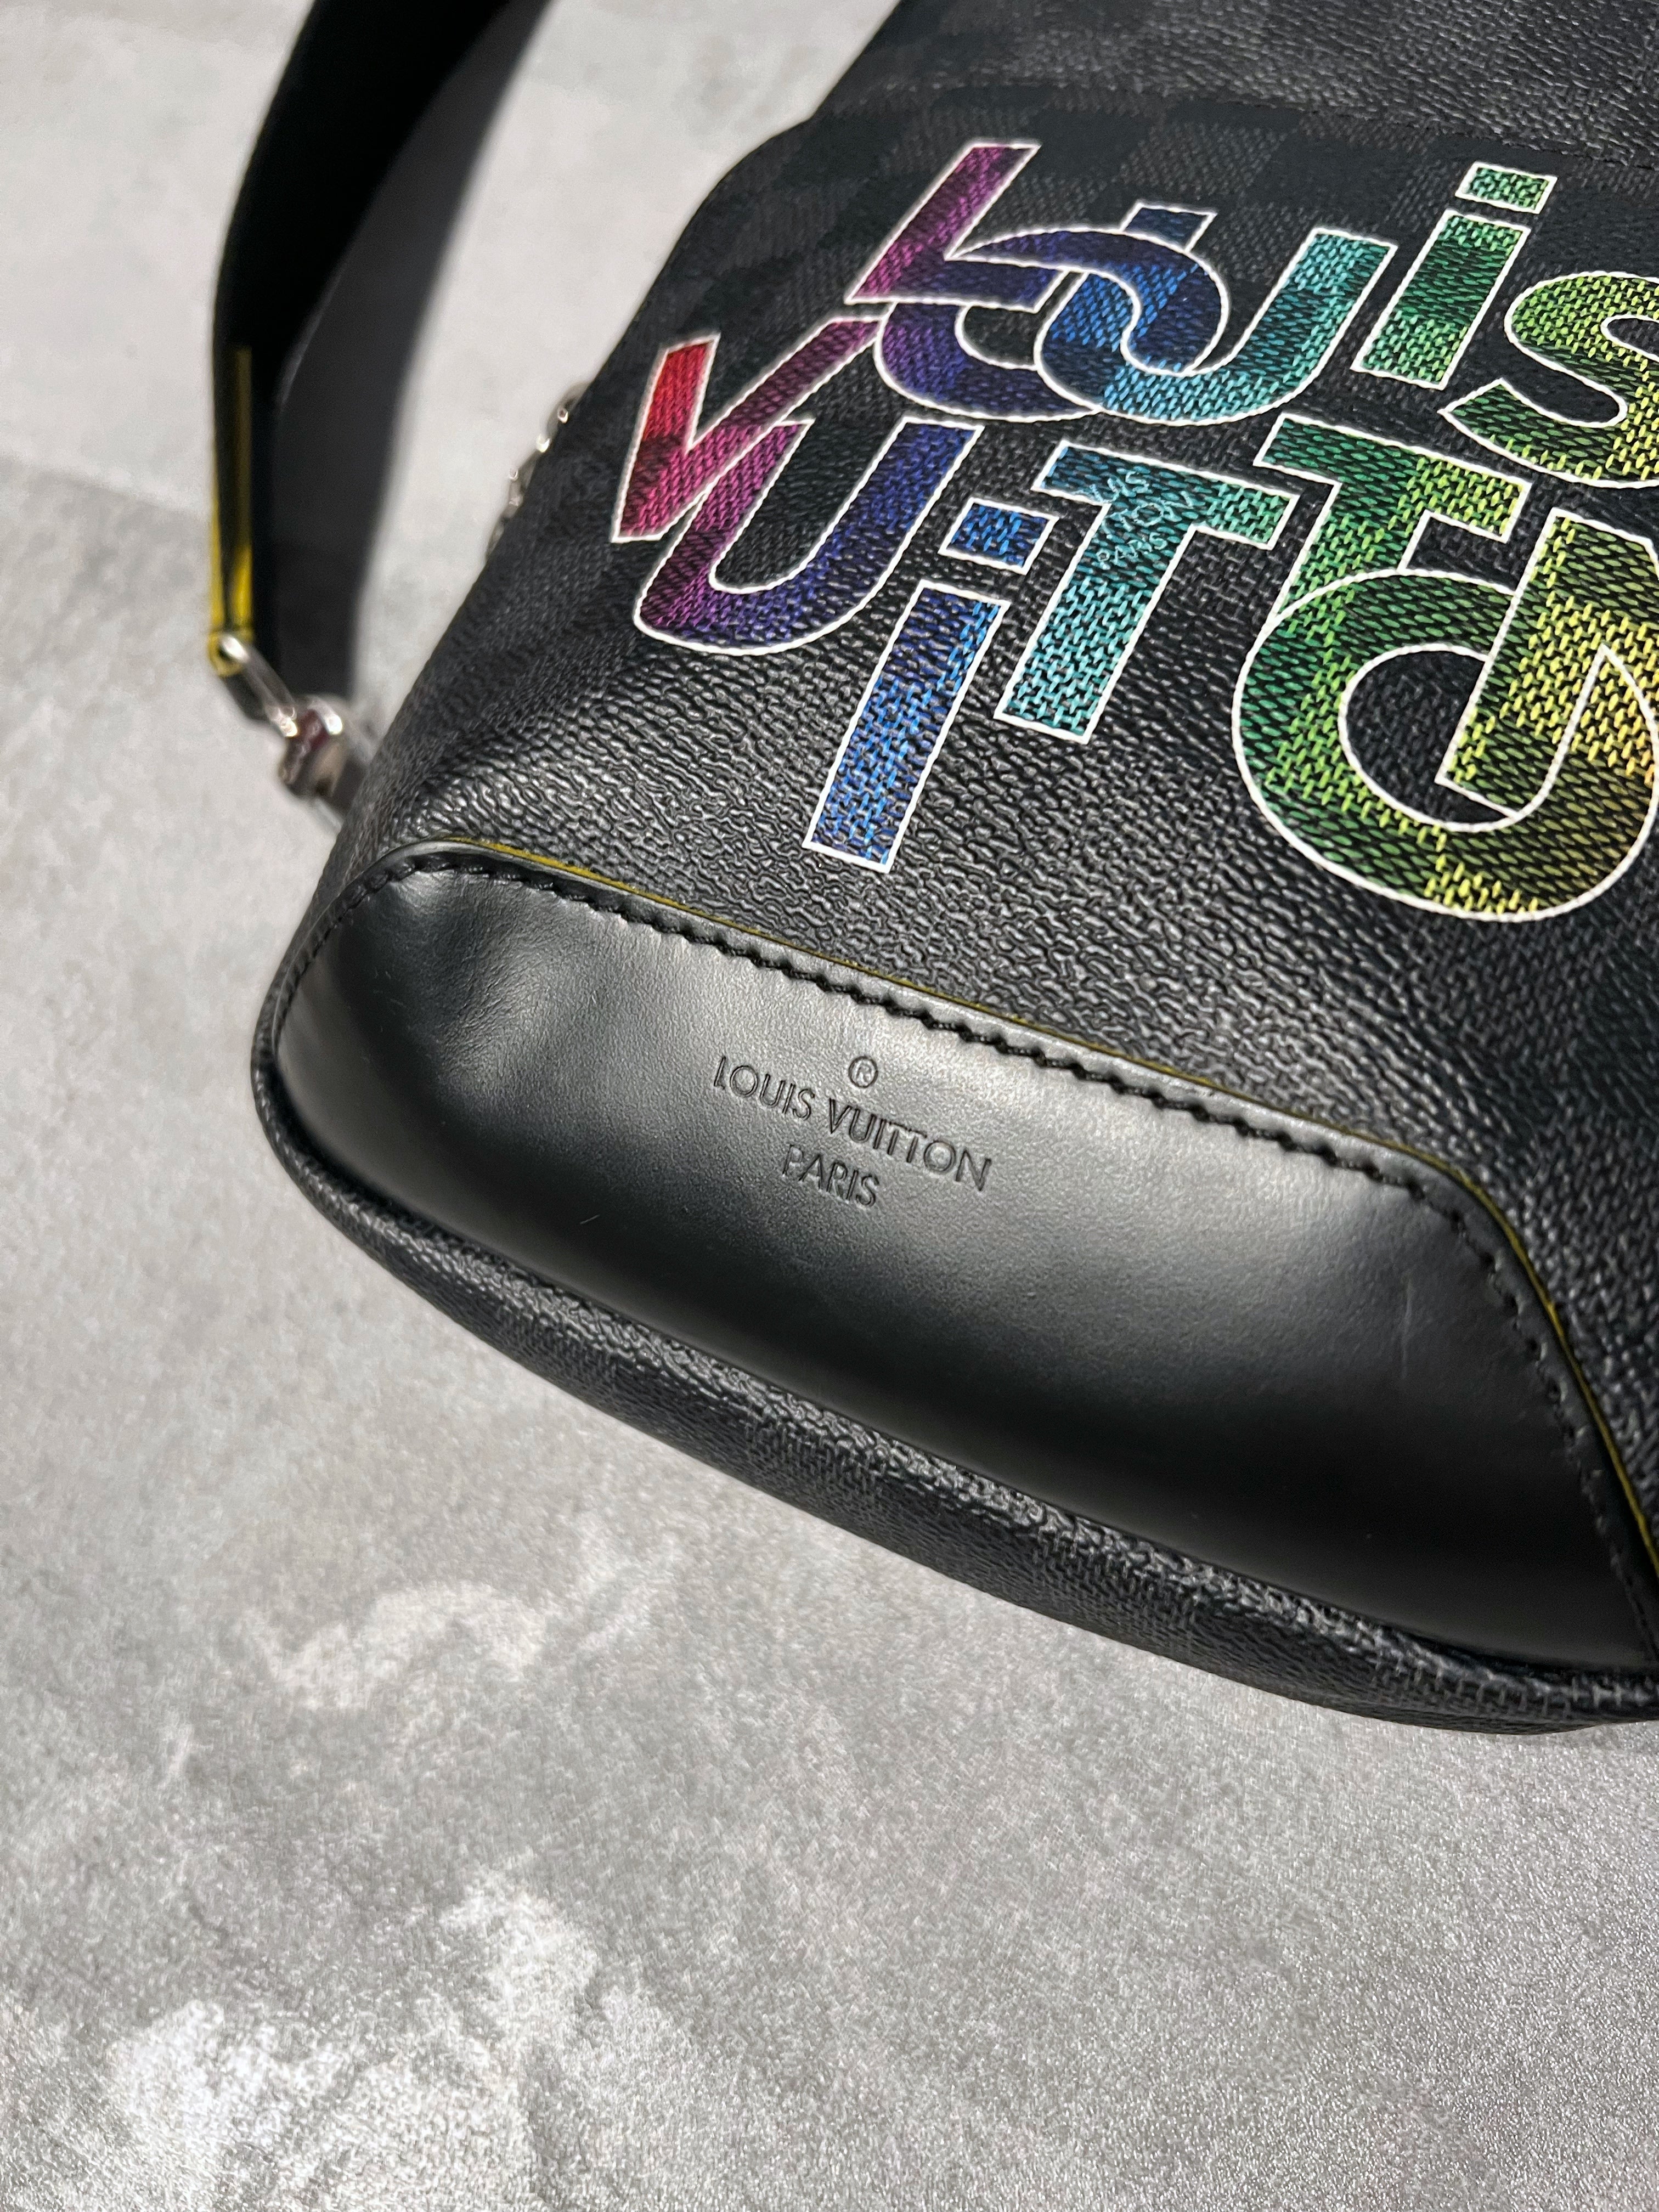 HOW TO CLEAN THE LOUIS VUITTON CANVAS AND COWHIDE LEATHER! DIY! AVENUE  SLING BAG! 